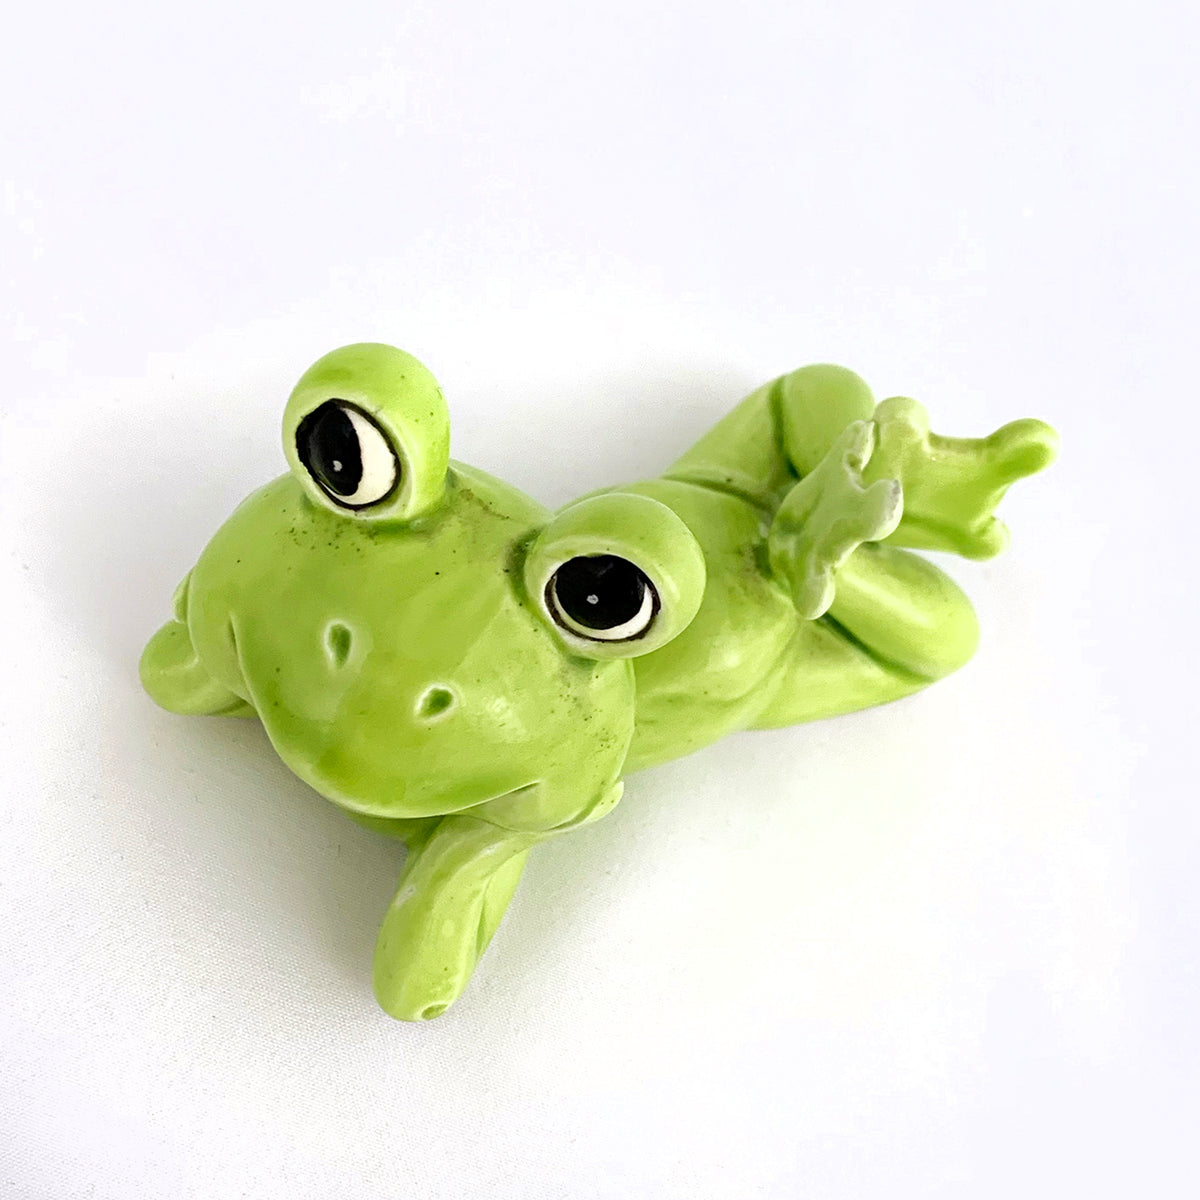 Vintage Mid-Century Ceramic Lime Green Smiling Seated Frog